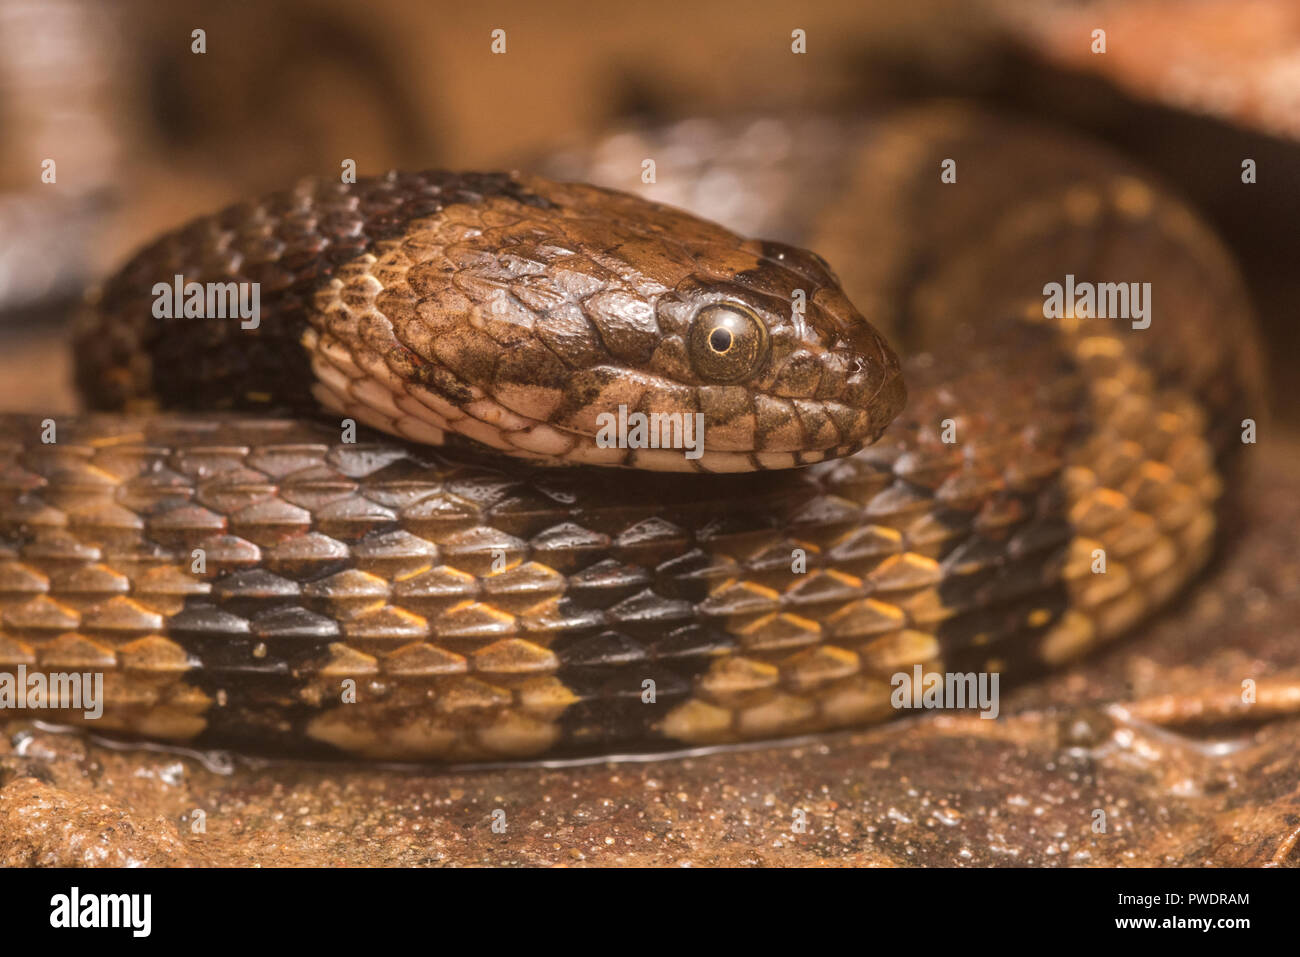 The brown banded water snake (Helicops angulatus) is a mildly venomous species from South America, this one was seen in Madre de Dios, Peru. Stock Photo